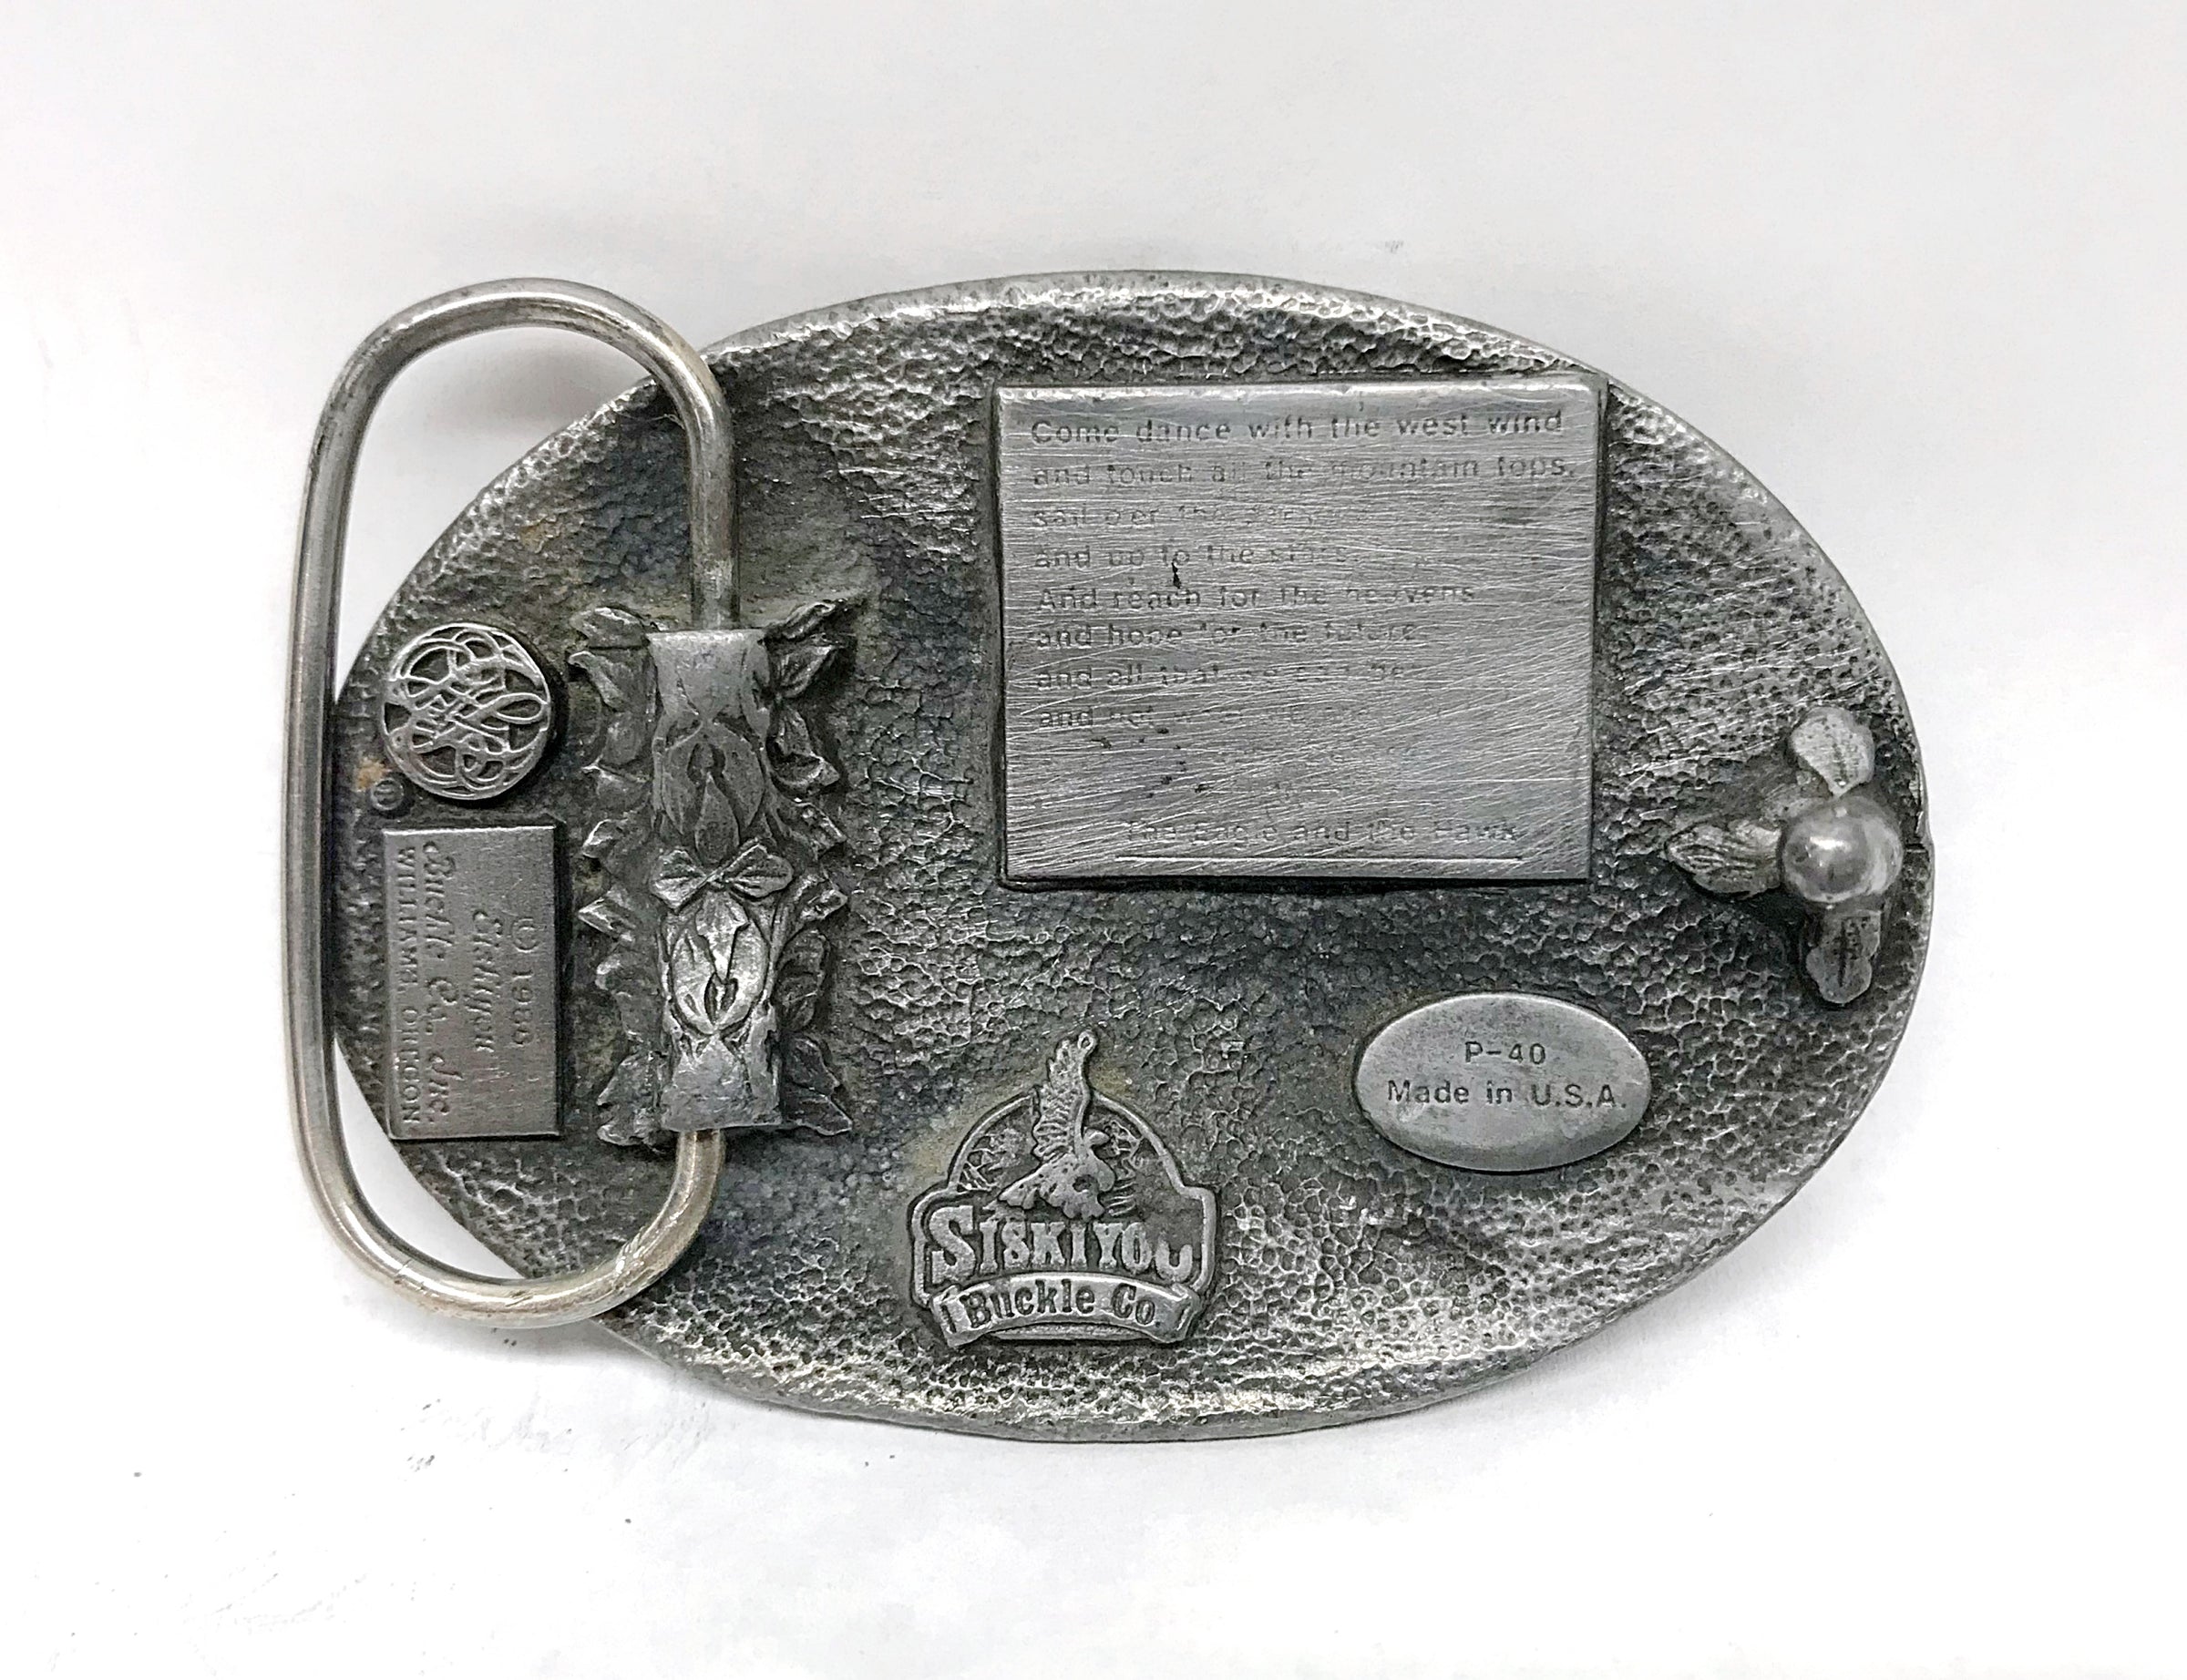 1986 Siskiyou P40 Flying Eagle and Sun Pewter Belt Buckle | USA - Hers and His Treasures